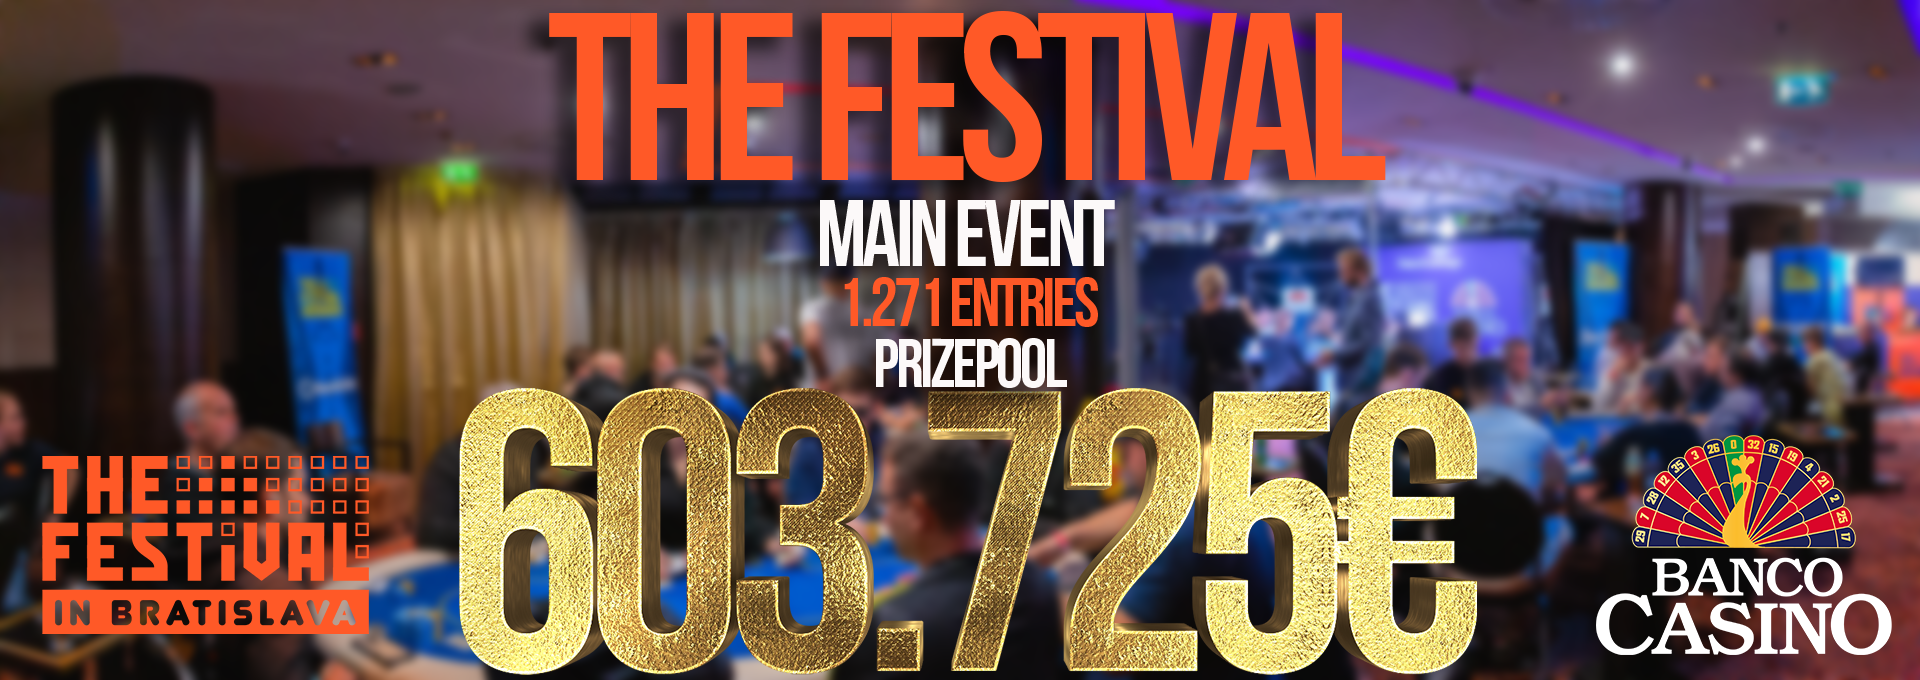 TheFestival Main Event with 1,271 entries and a 603,725€ prize pool is looking for a champion who will take home 126,650€!